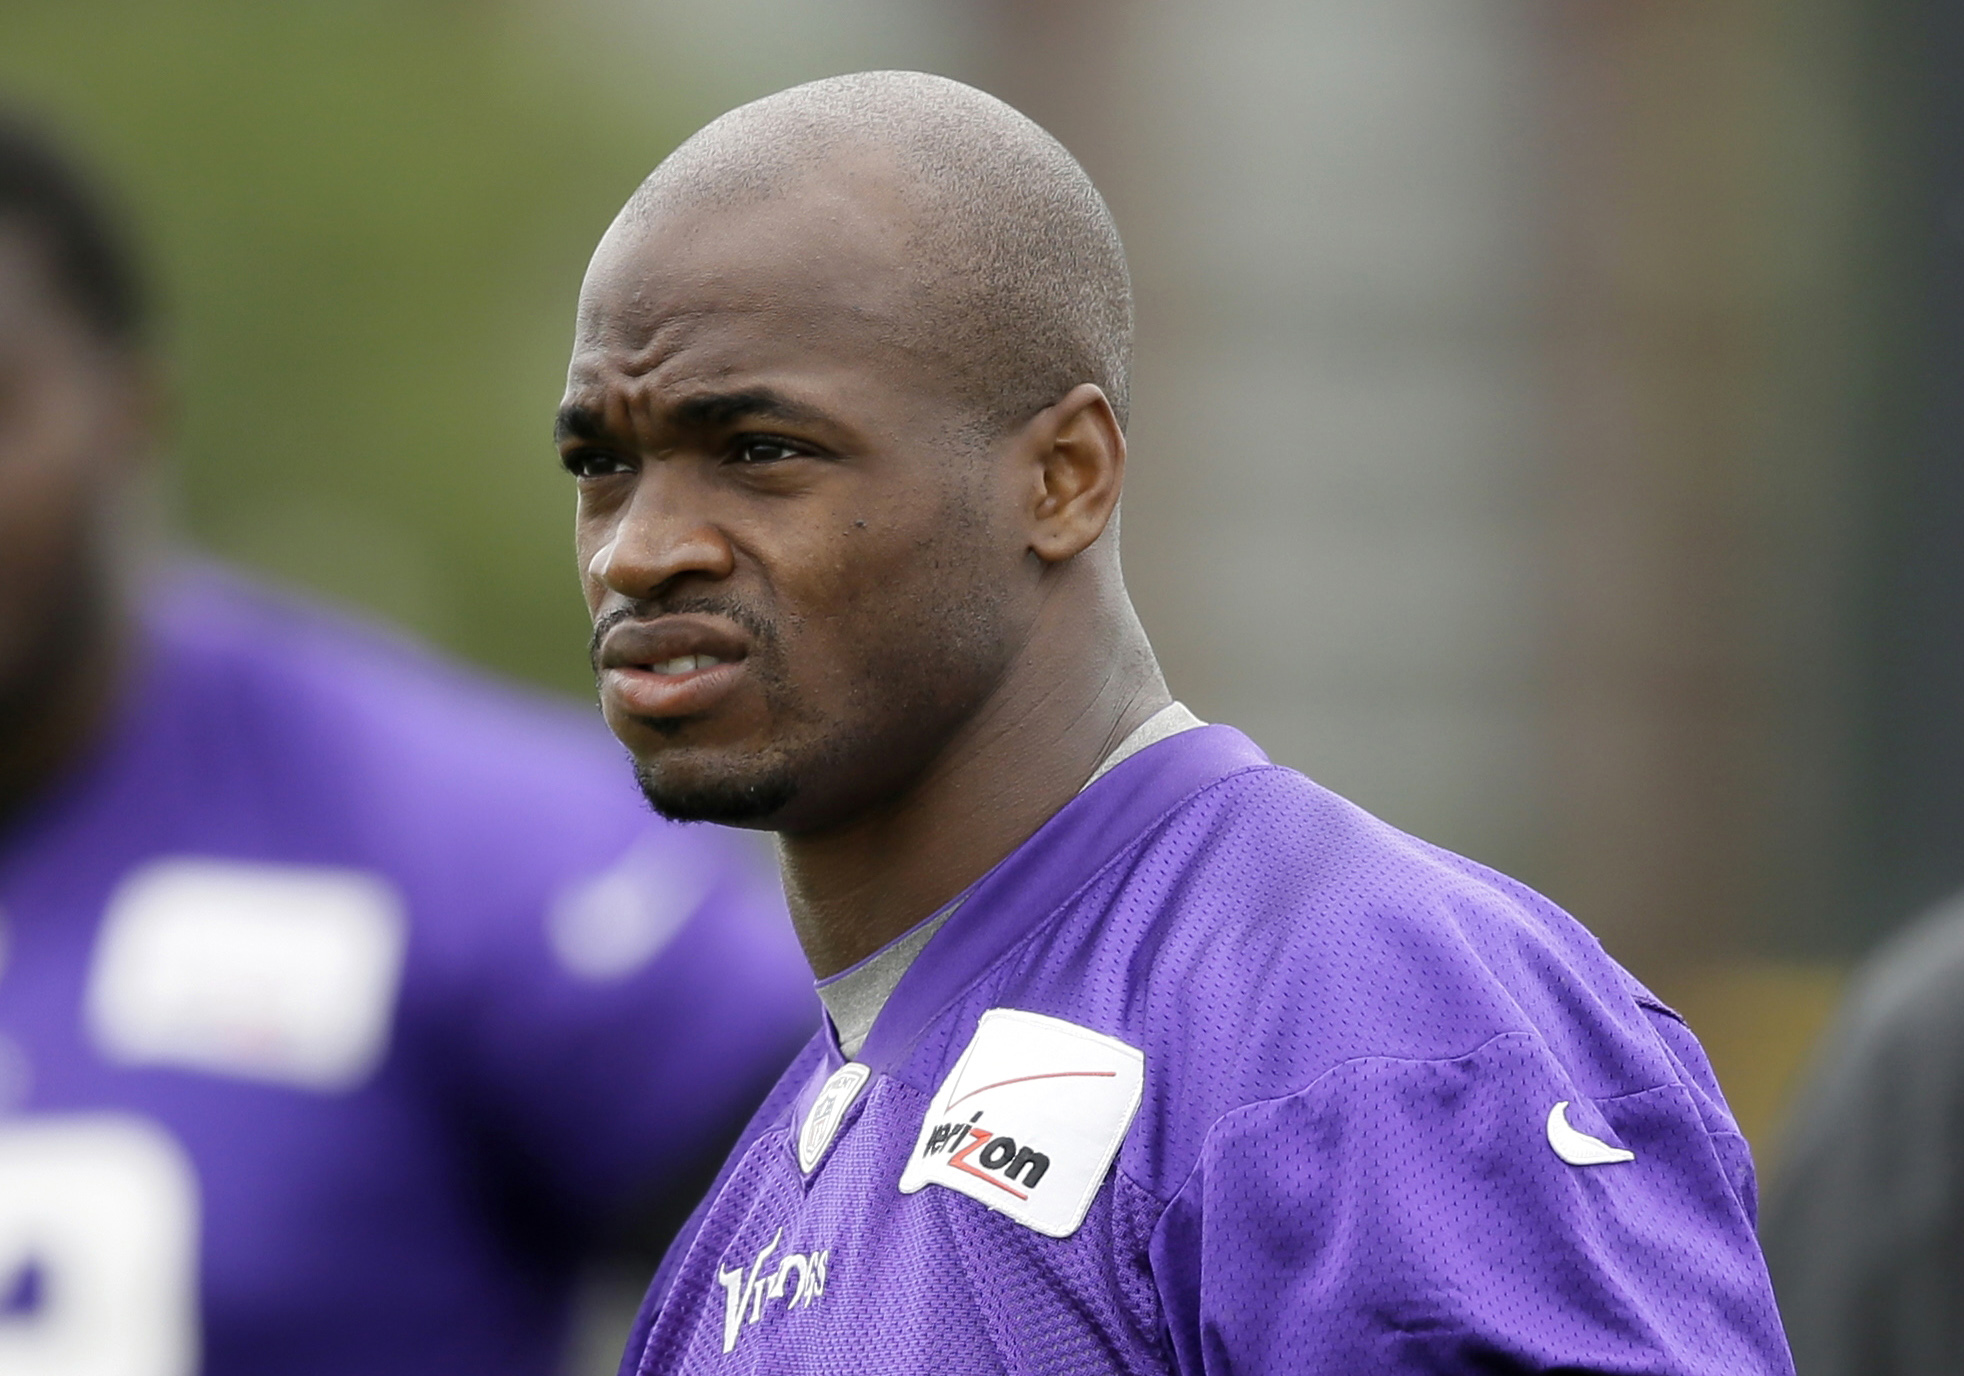   In this July 28, 2014, file photo, Minnesota Vikings running back Adrian Peterson looks on during NFL football training camp in Mankato.  (AP Photo/Charlie Neibergall, File)